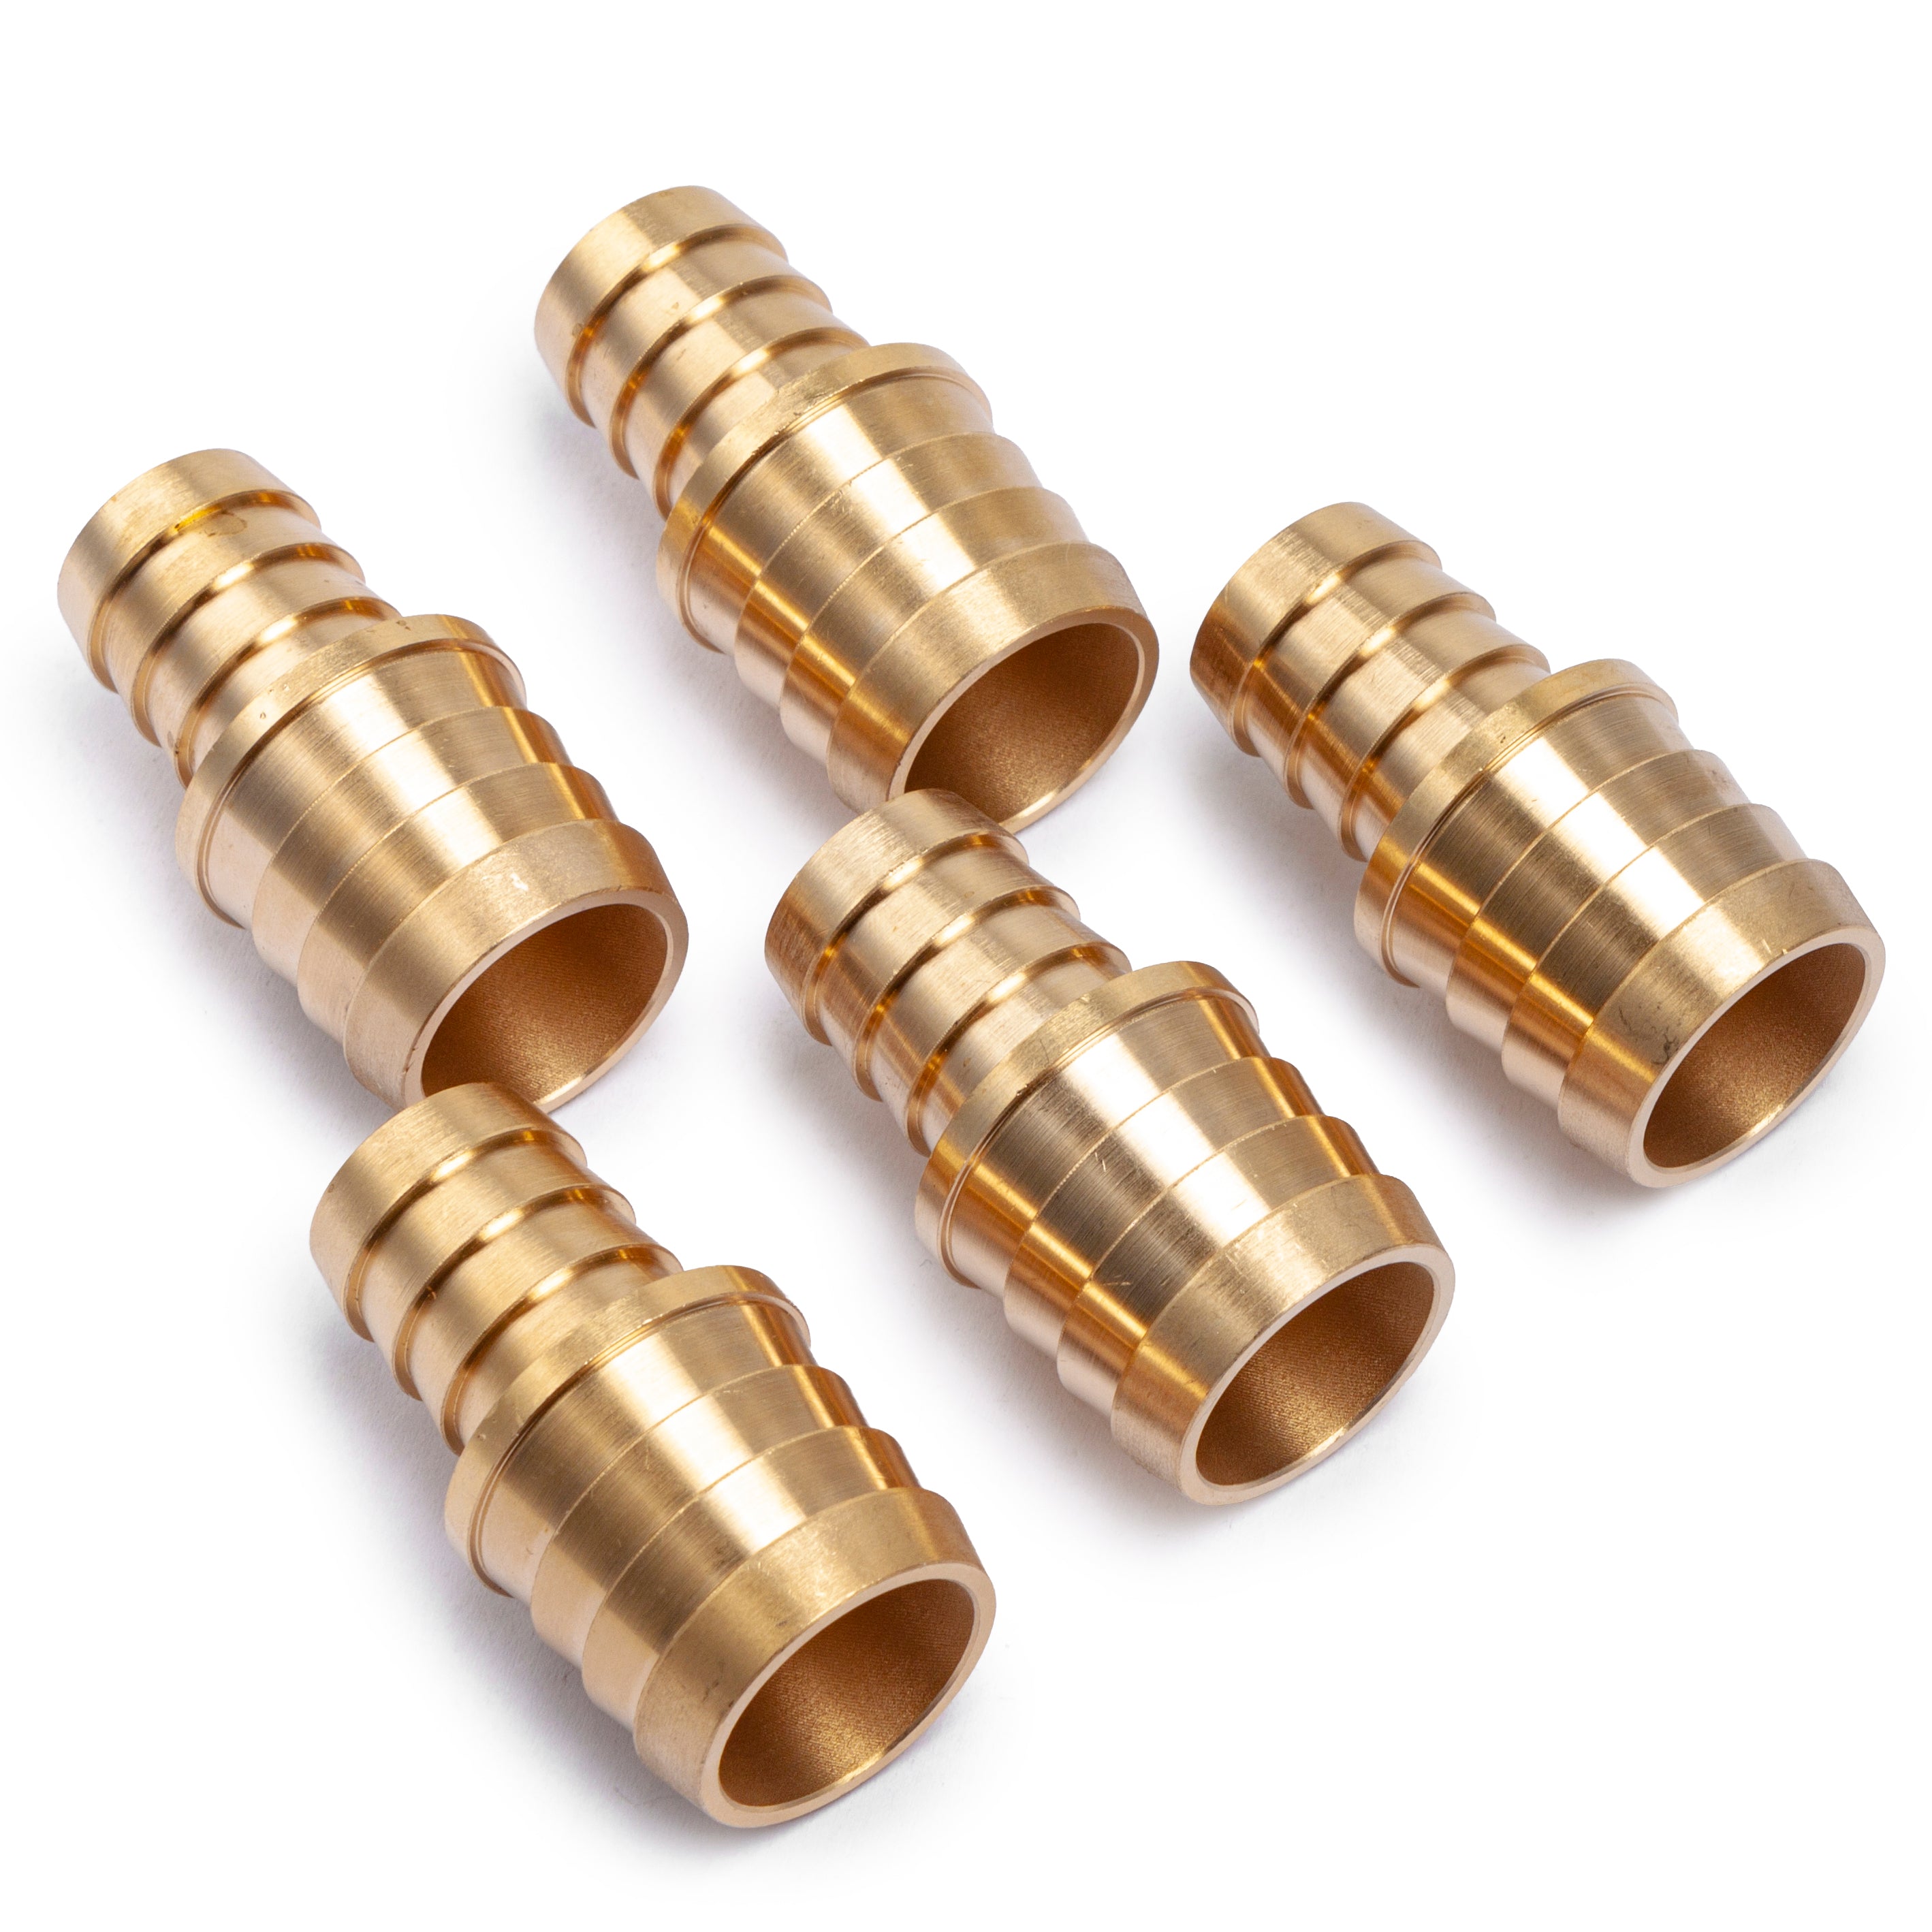 LTWFITTING Brass Barb Hose Reducing Splicer Mender 1-Inch ID Hose x 3/4-Inch ID Hose Fitting Air Fuel Boat (Pack of 5)